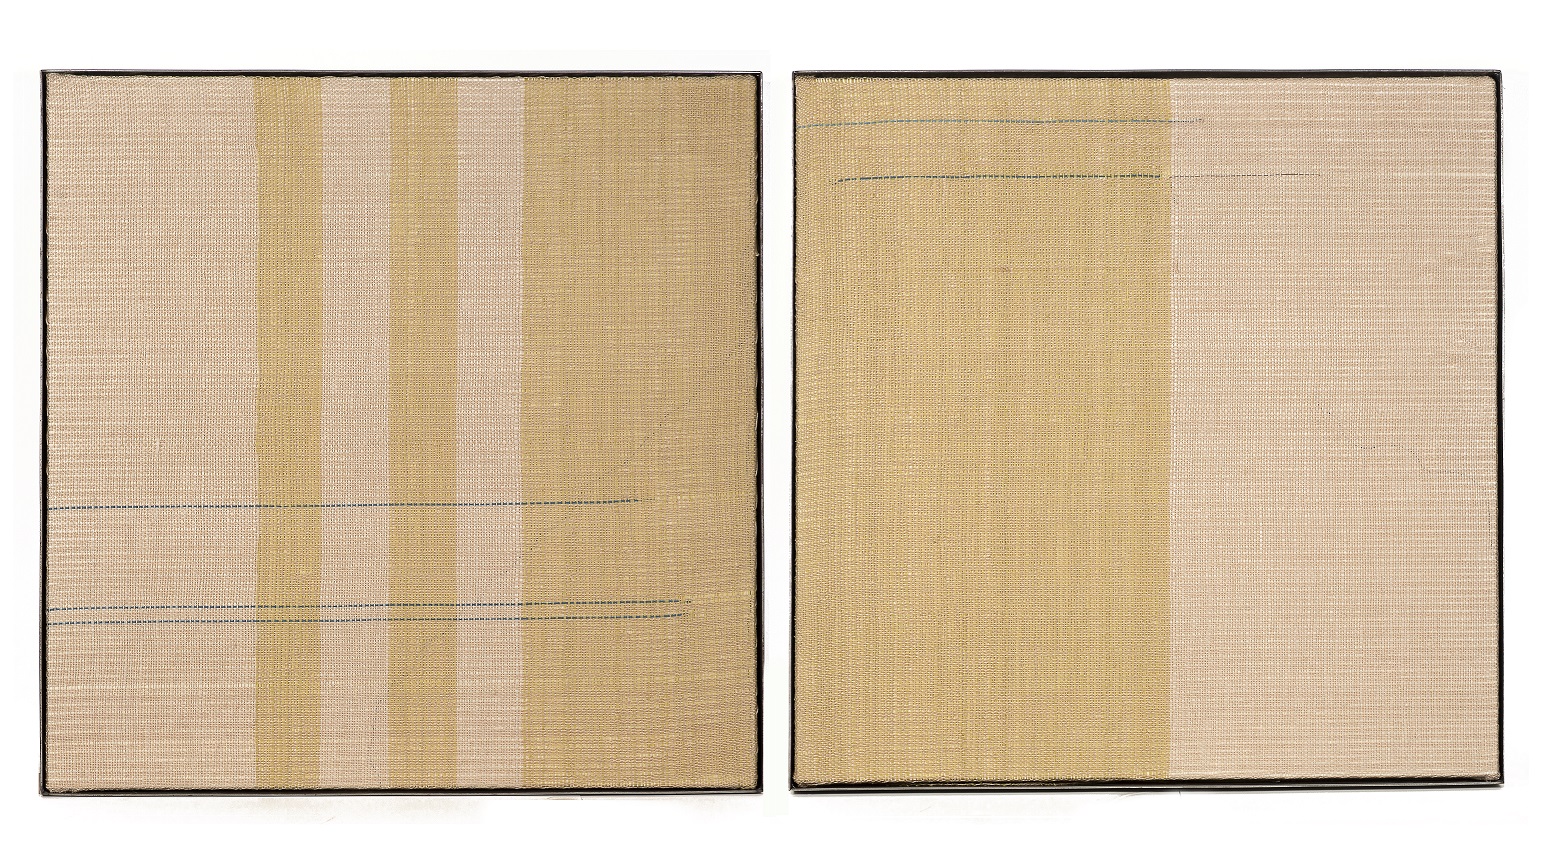 

											Elizabeth Hohimer</b>

											<em>
												Negotiated Desires</em> 

											<h4>
												May 21 - July 31											</h4>

		                																																<i>Laying Halfway in the Shade (diptych),</i>  
																																								2021, 
																																								dirt dyed cotton tapestry in steel frame, 
																																								36 x 36 x 2 1/2 inches 
																								
		                				